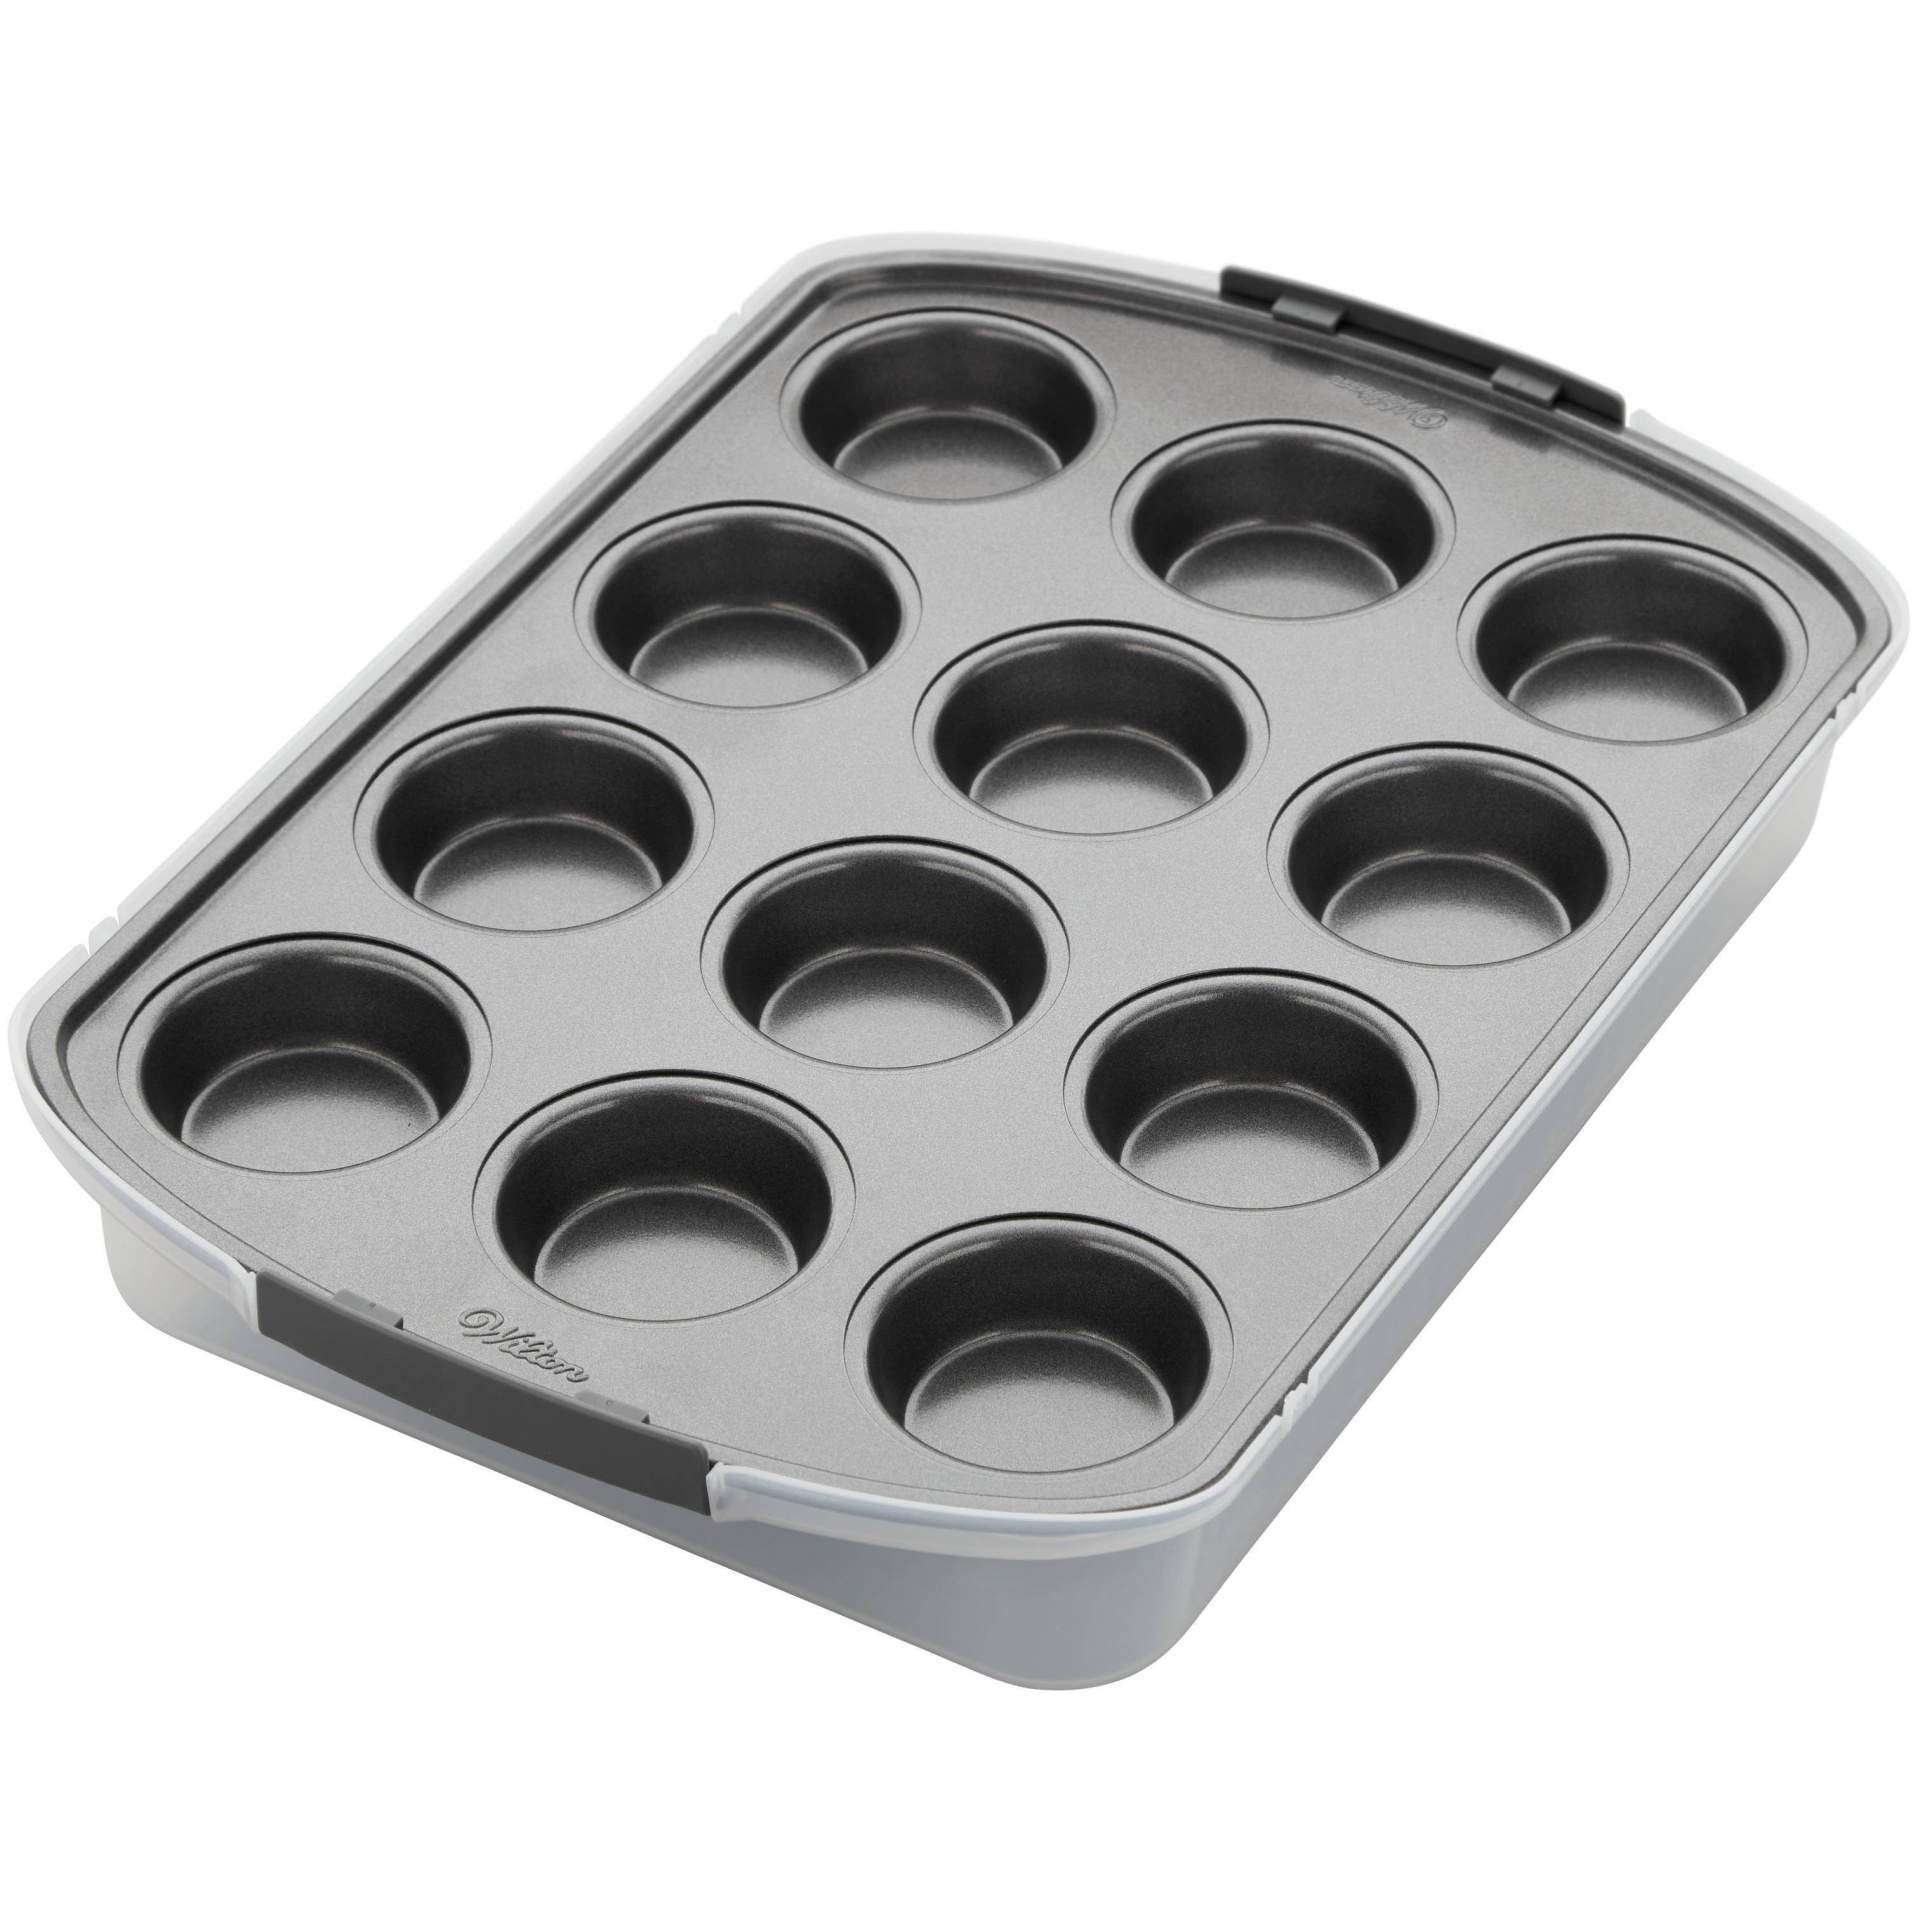 Wilton Bake It Better Non-Stick Cupcake Pan with Tall Lid, 12-Cup 